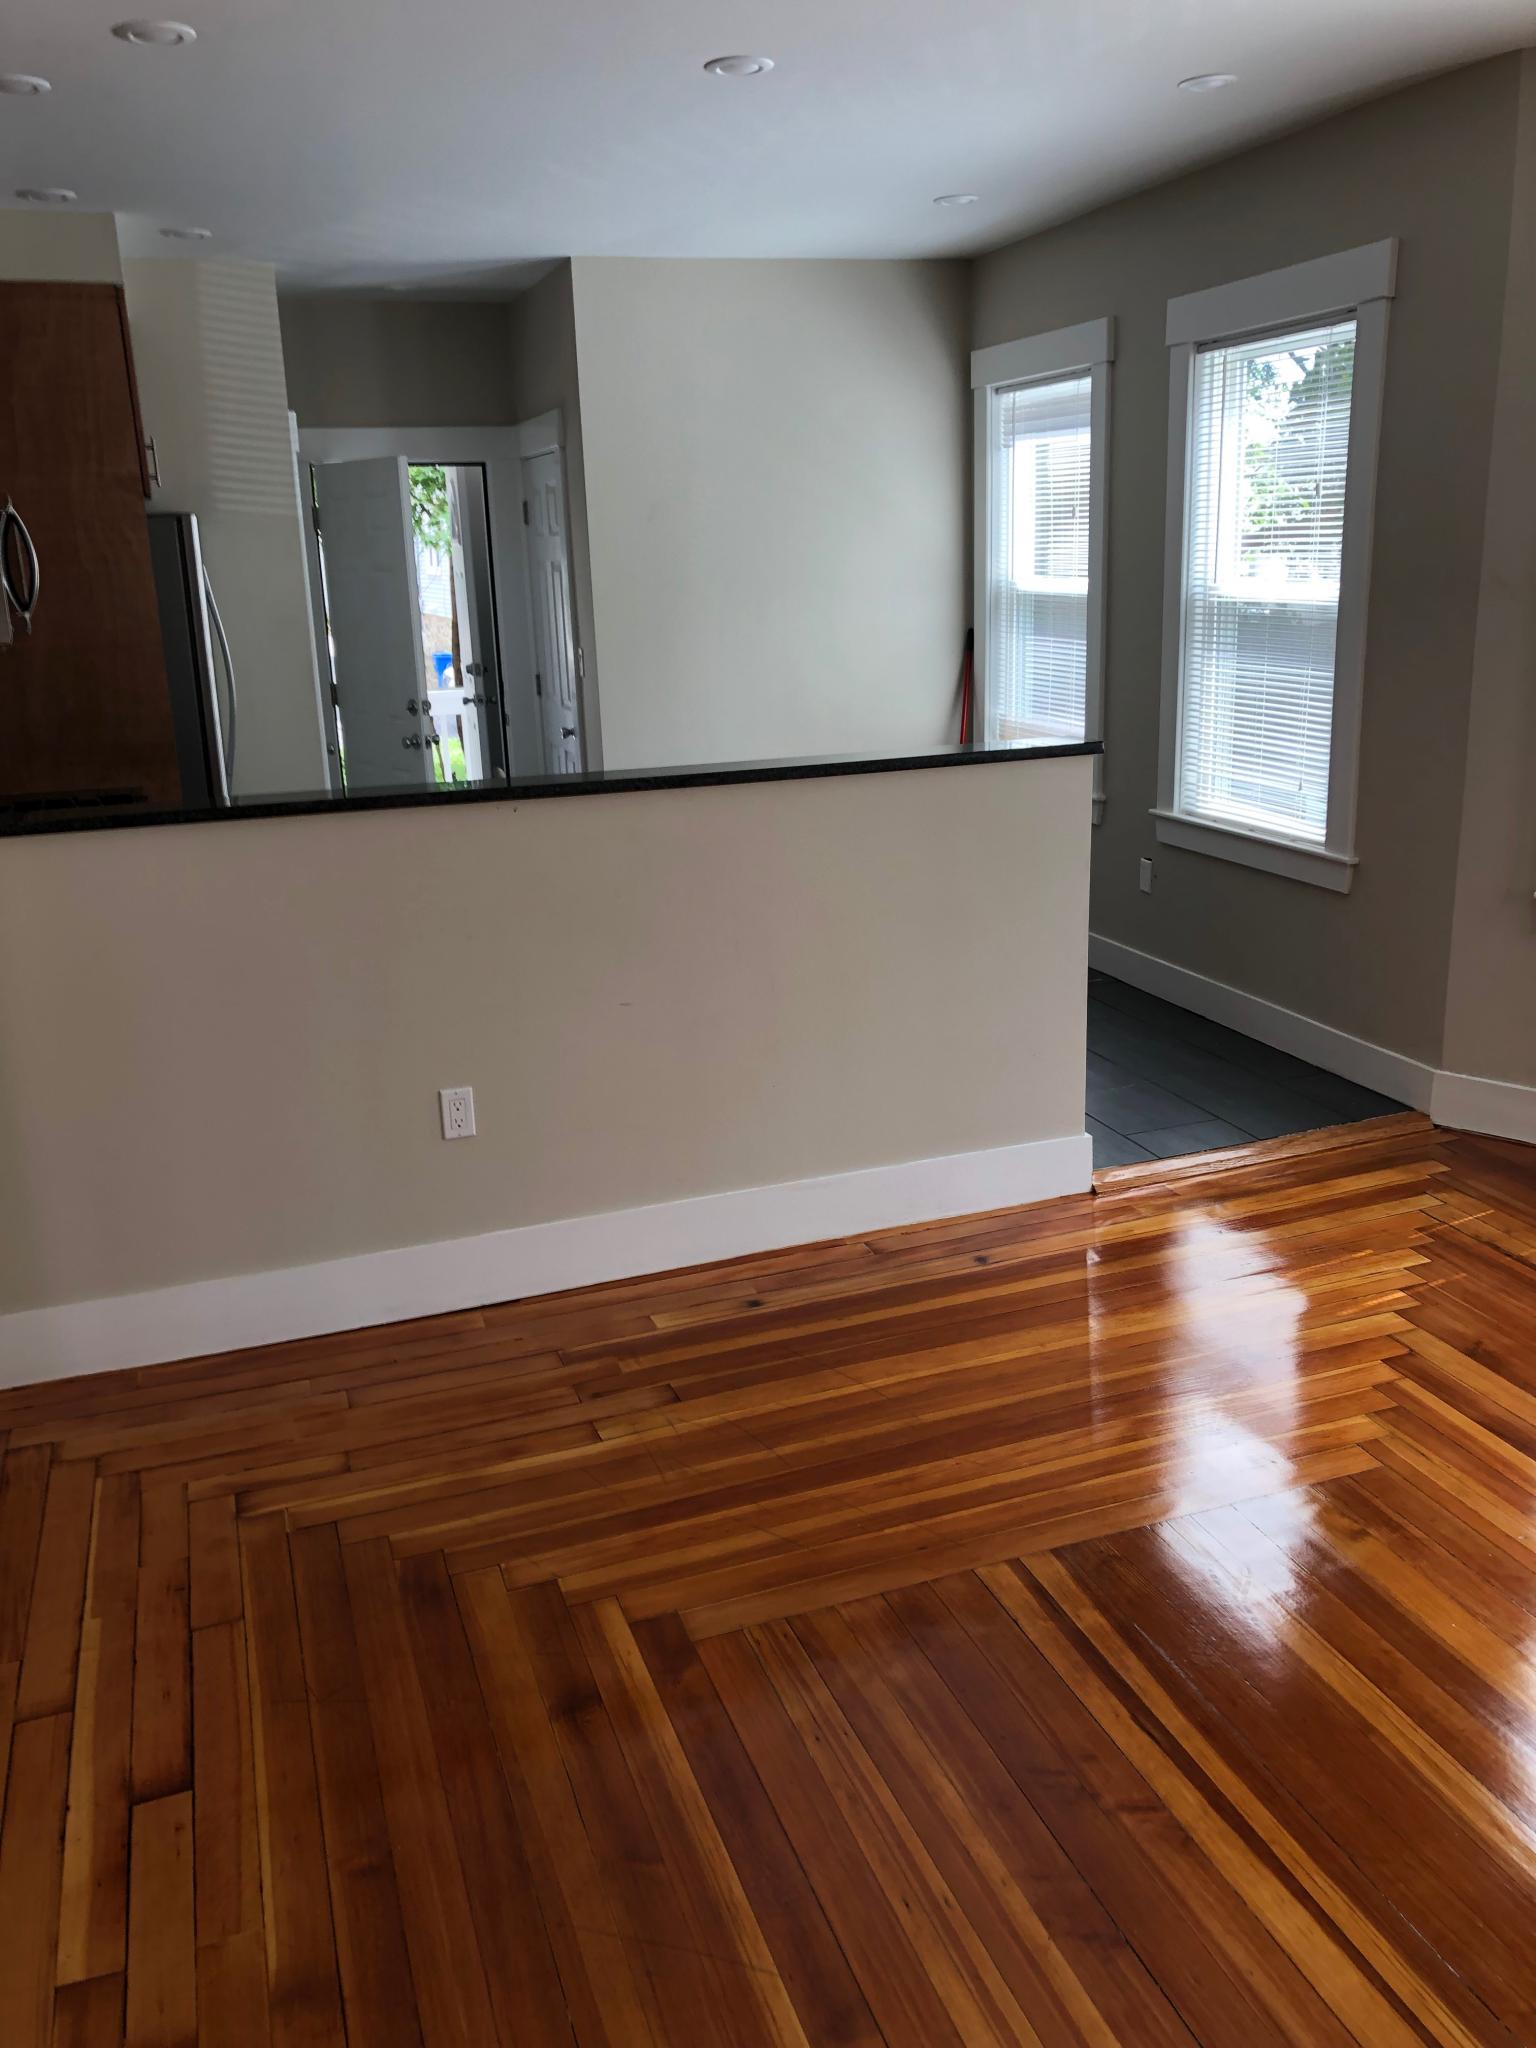 Photos of apartment on Banks St.,Waltham MA 02451